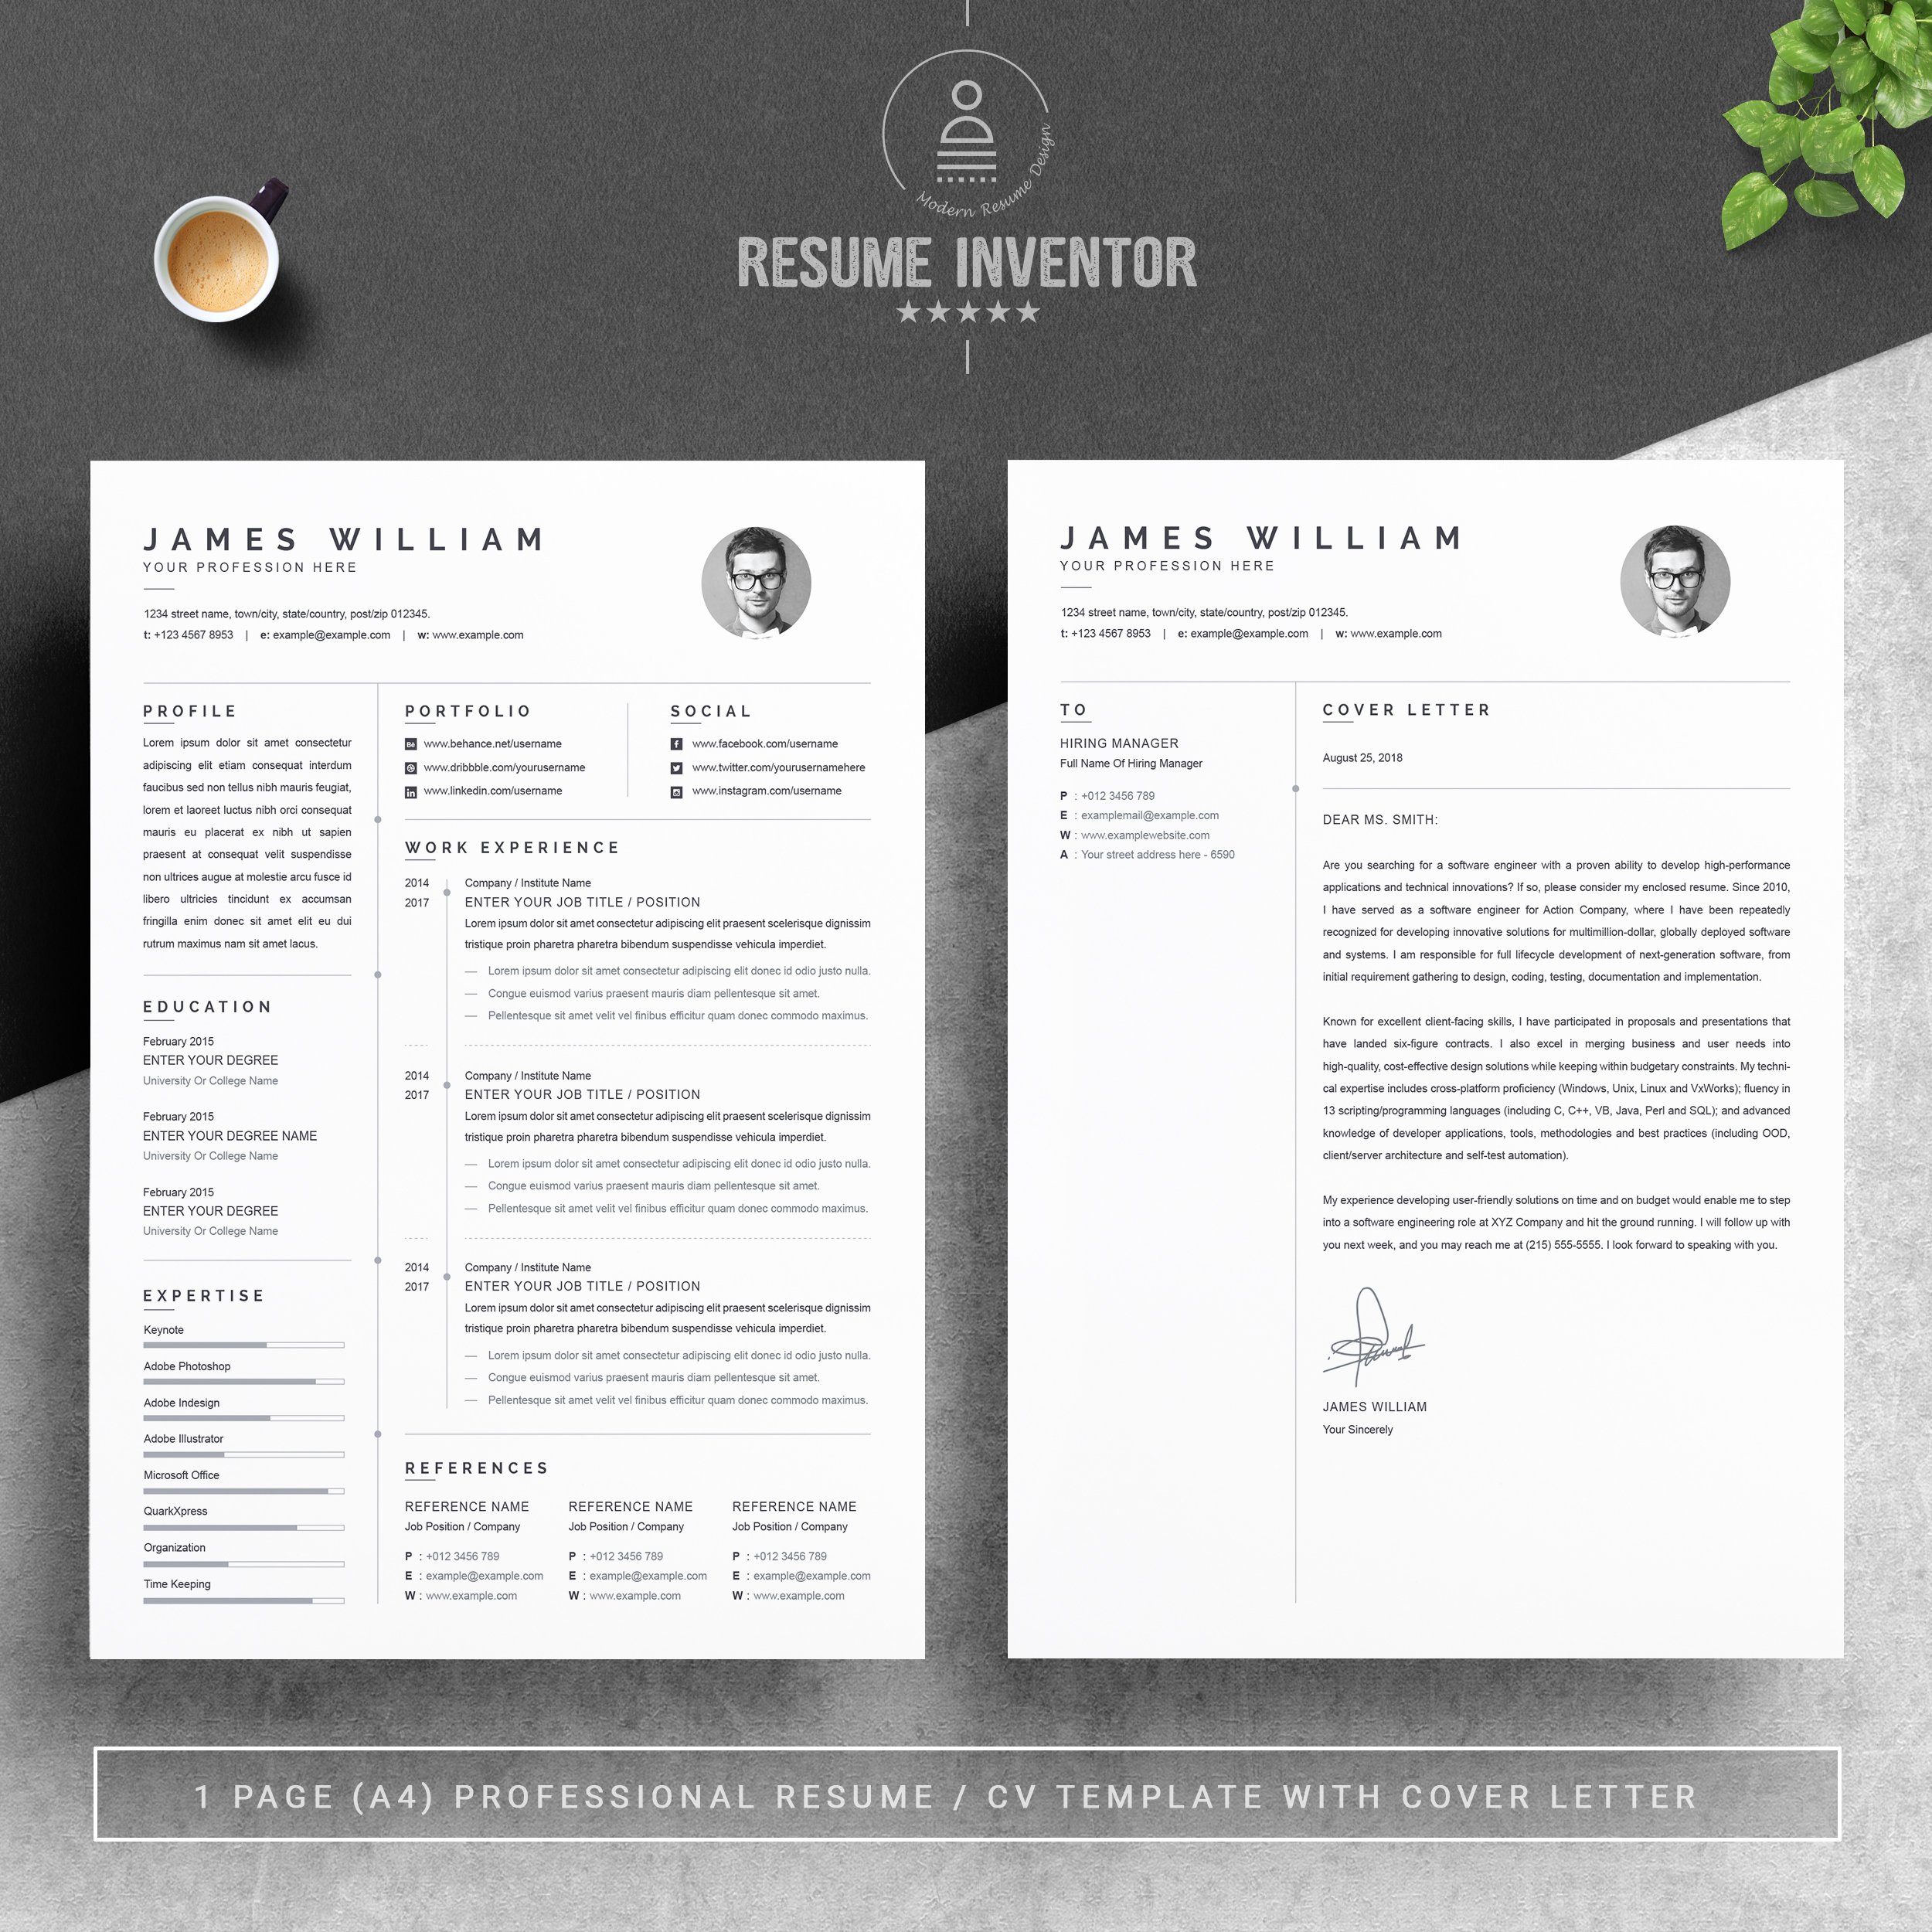 One Page Resume and Cover Letter preview image.